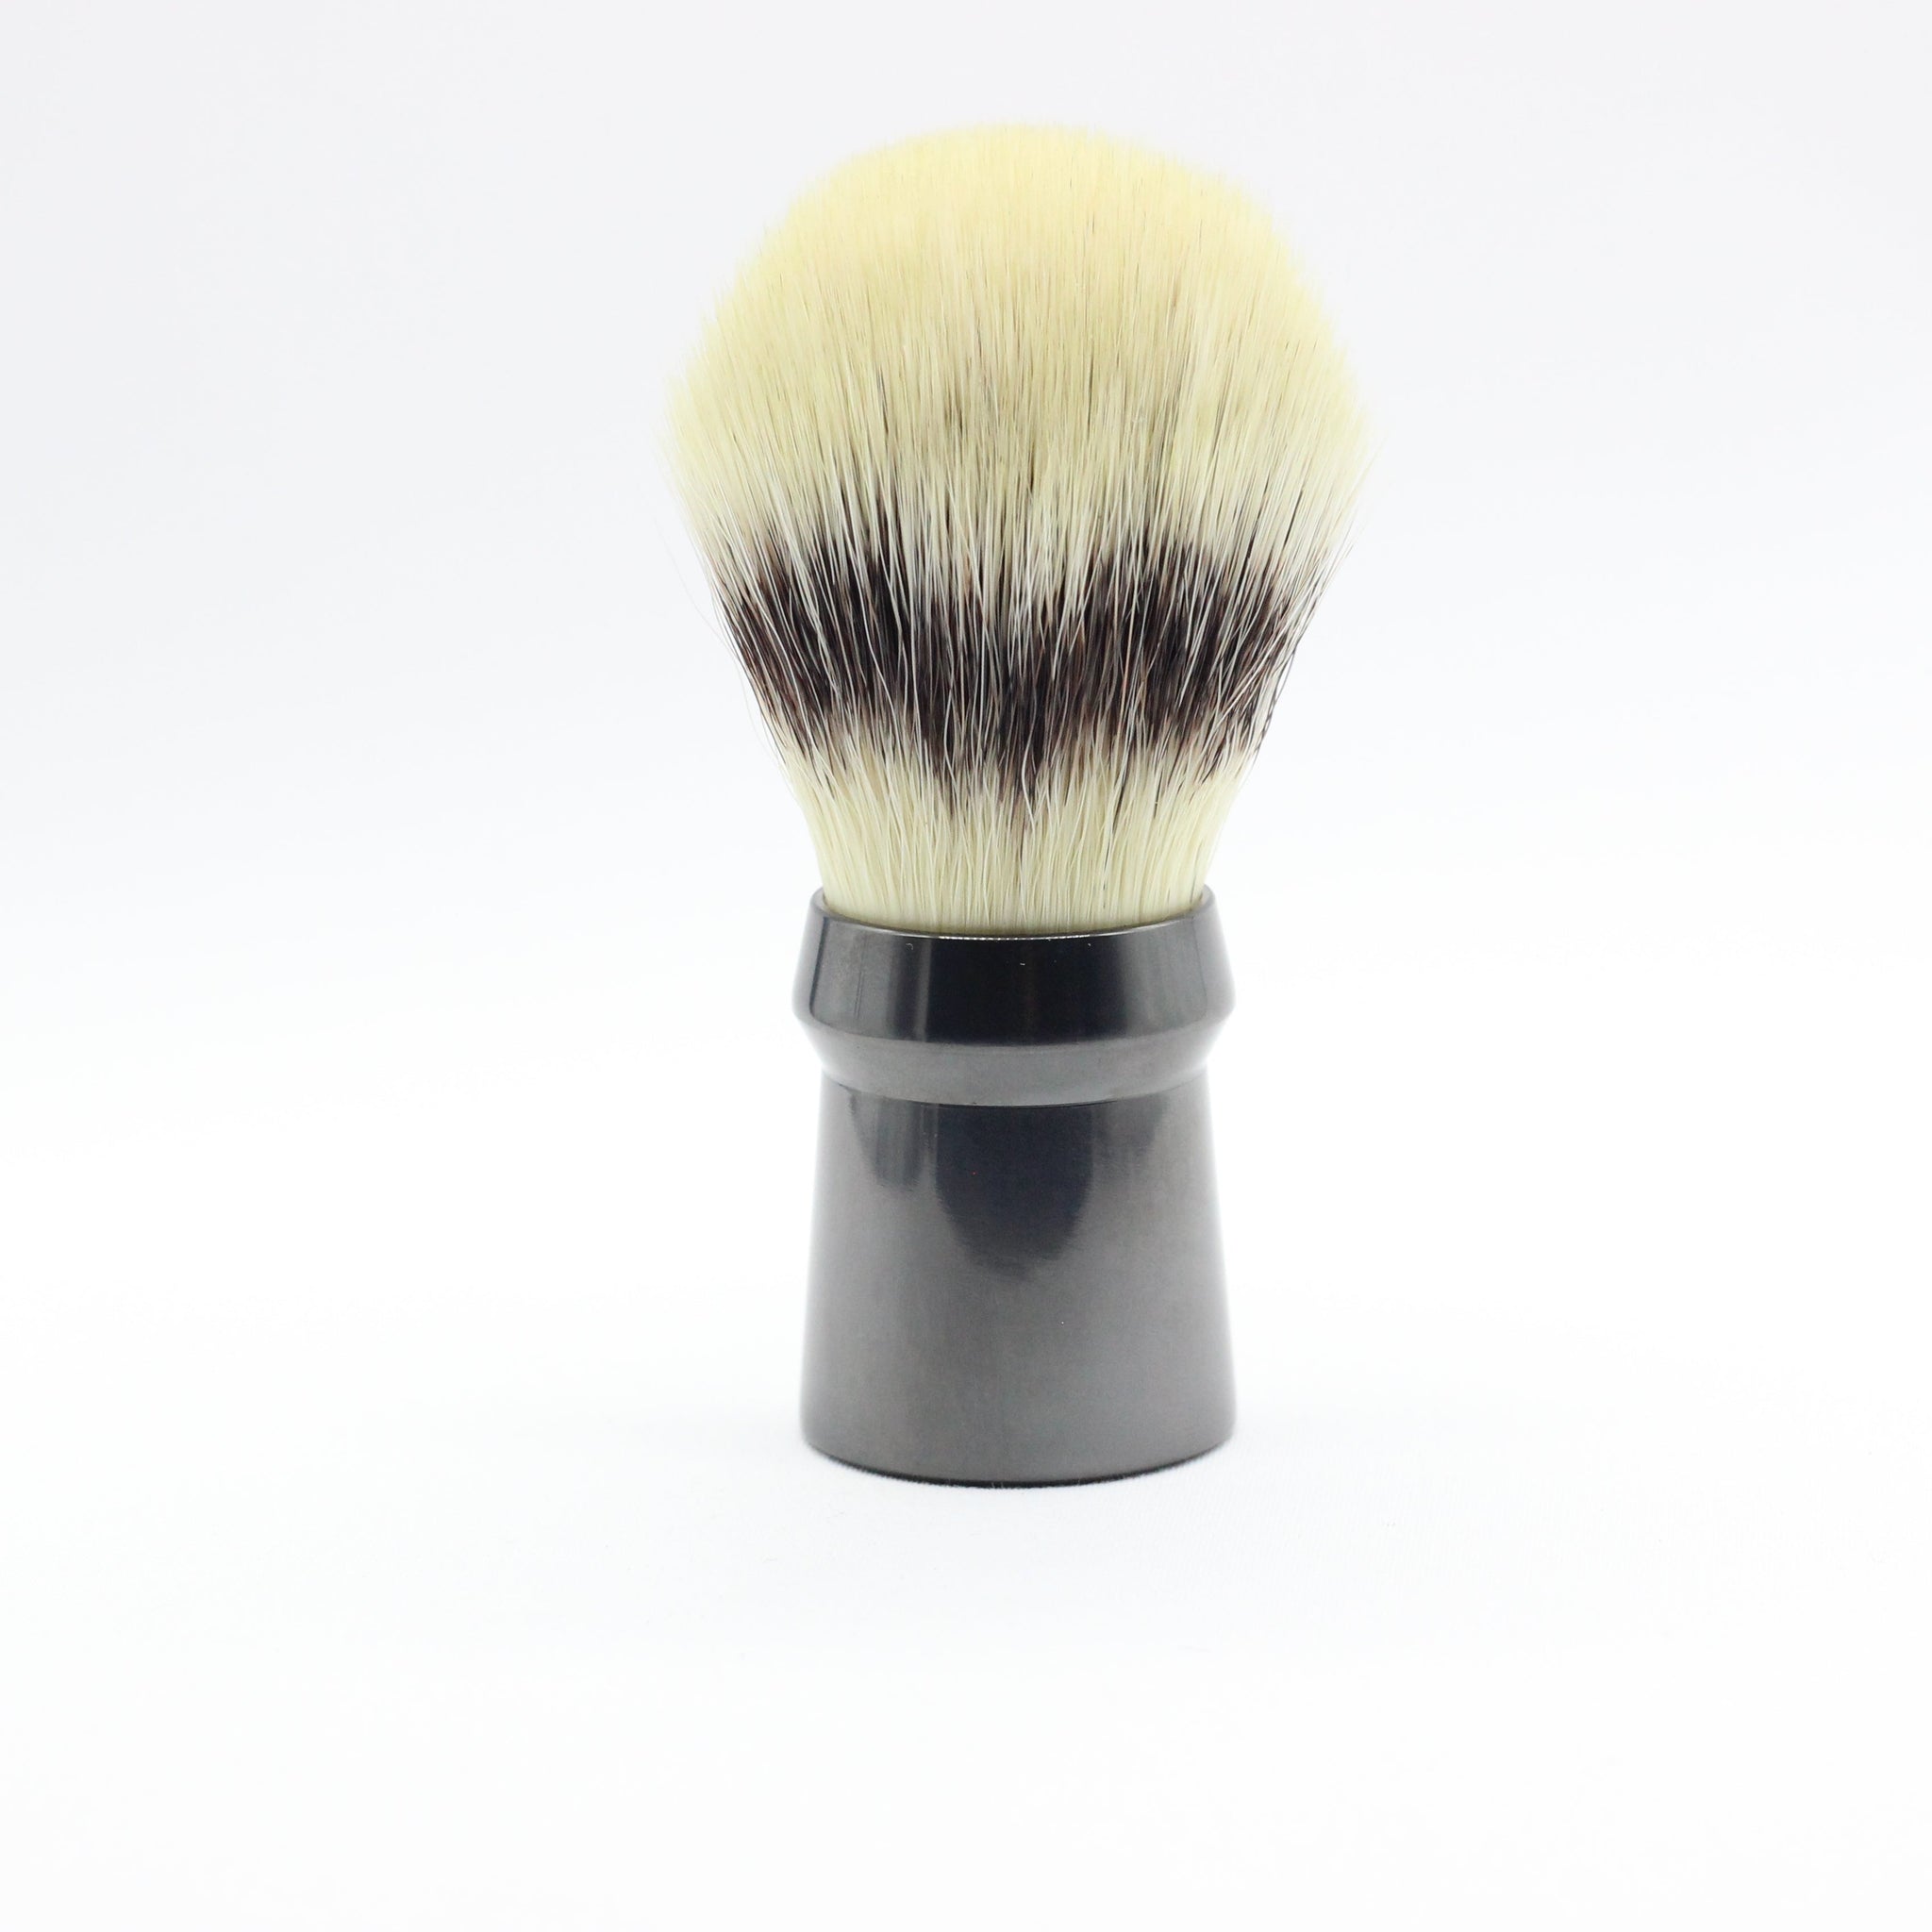 Side view ergonomic Titanium DLC coated shaving Brush - Hand Tied shaving knot - synthetic , not badger hair or horse hair . Cruelty free - Hand tied in Germany